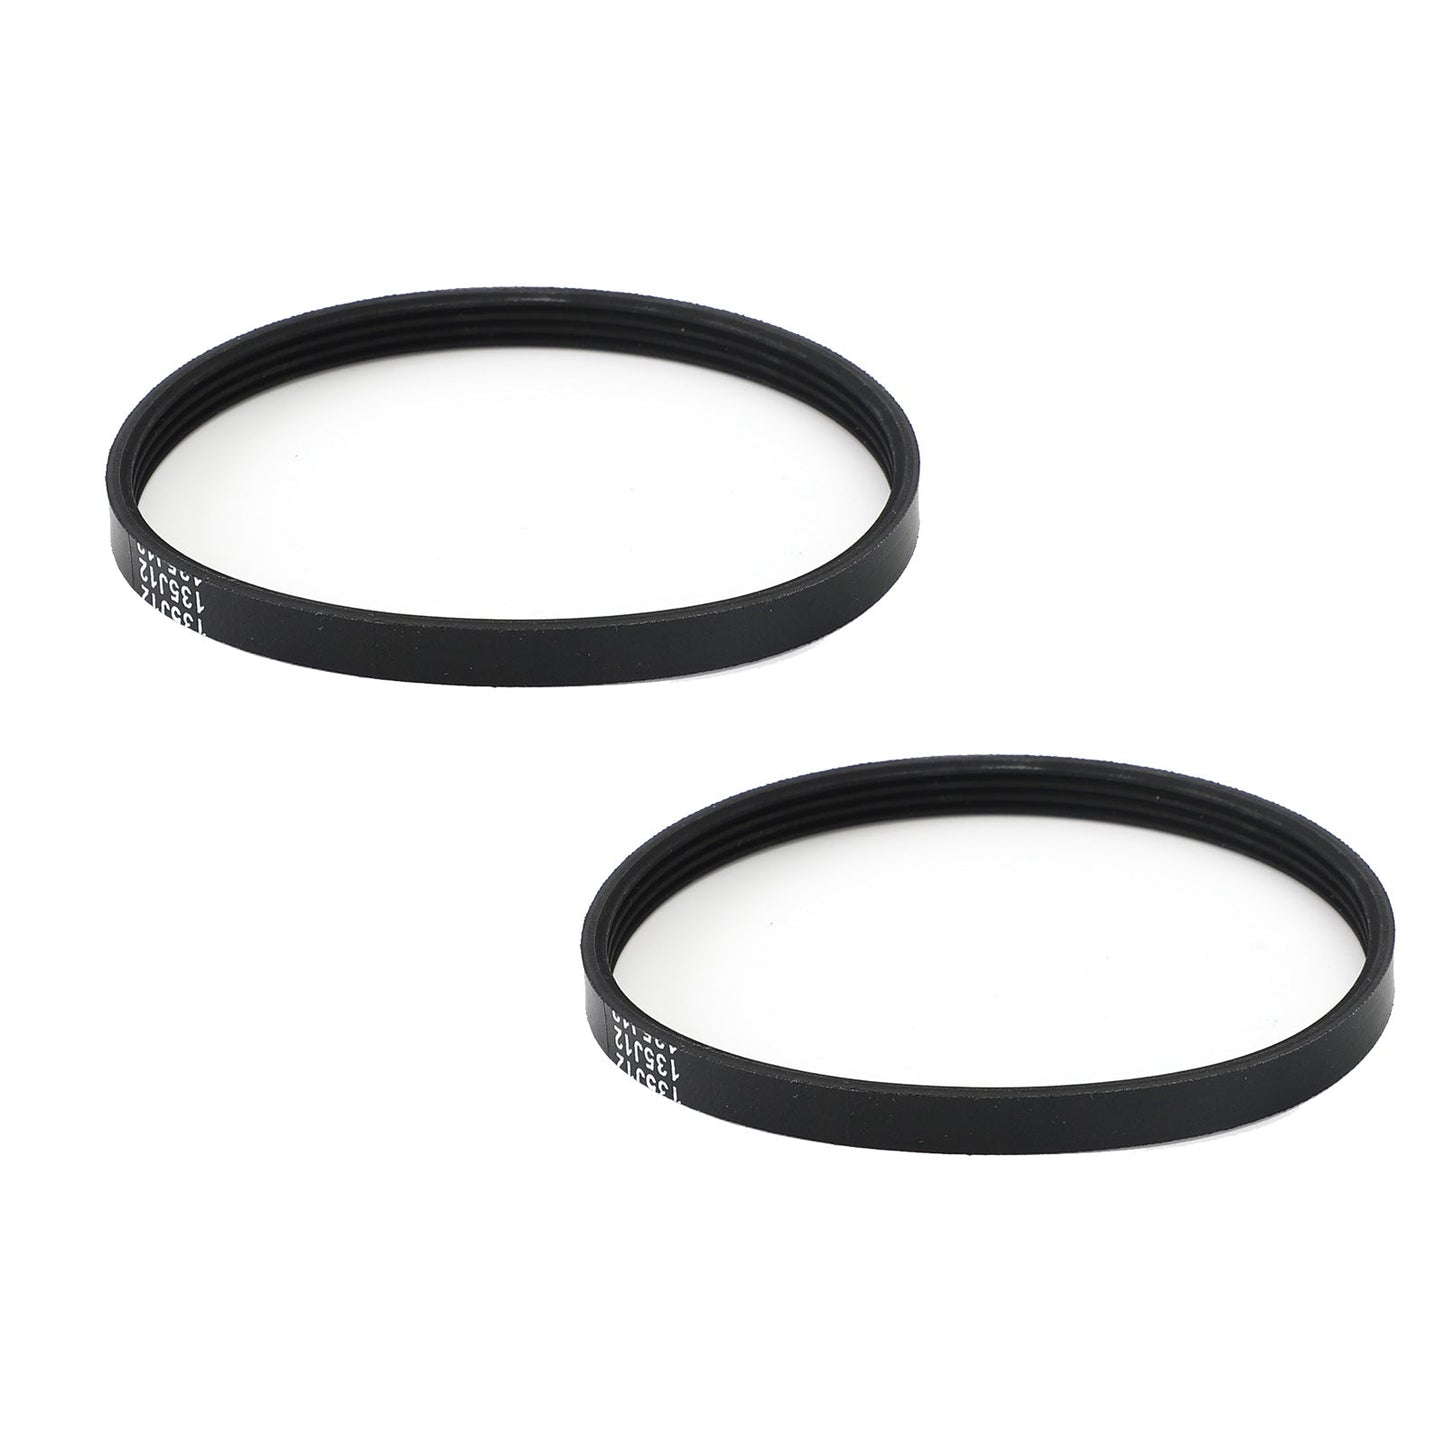 2Pcs Rubber Drive Belt For Sears Craftsman Band Saw Model 124.21400 Band Saw